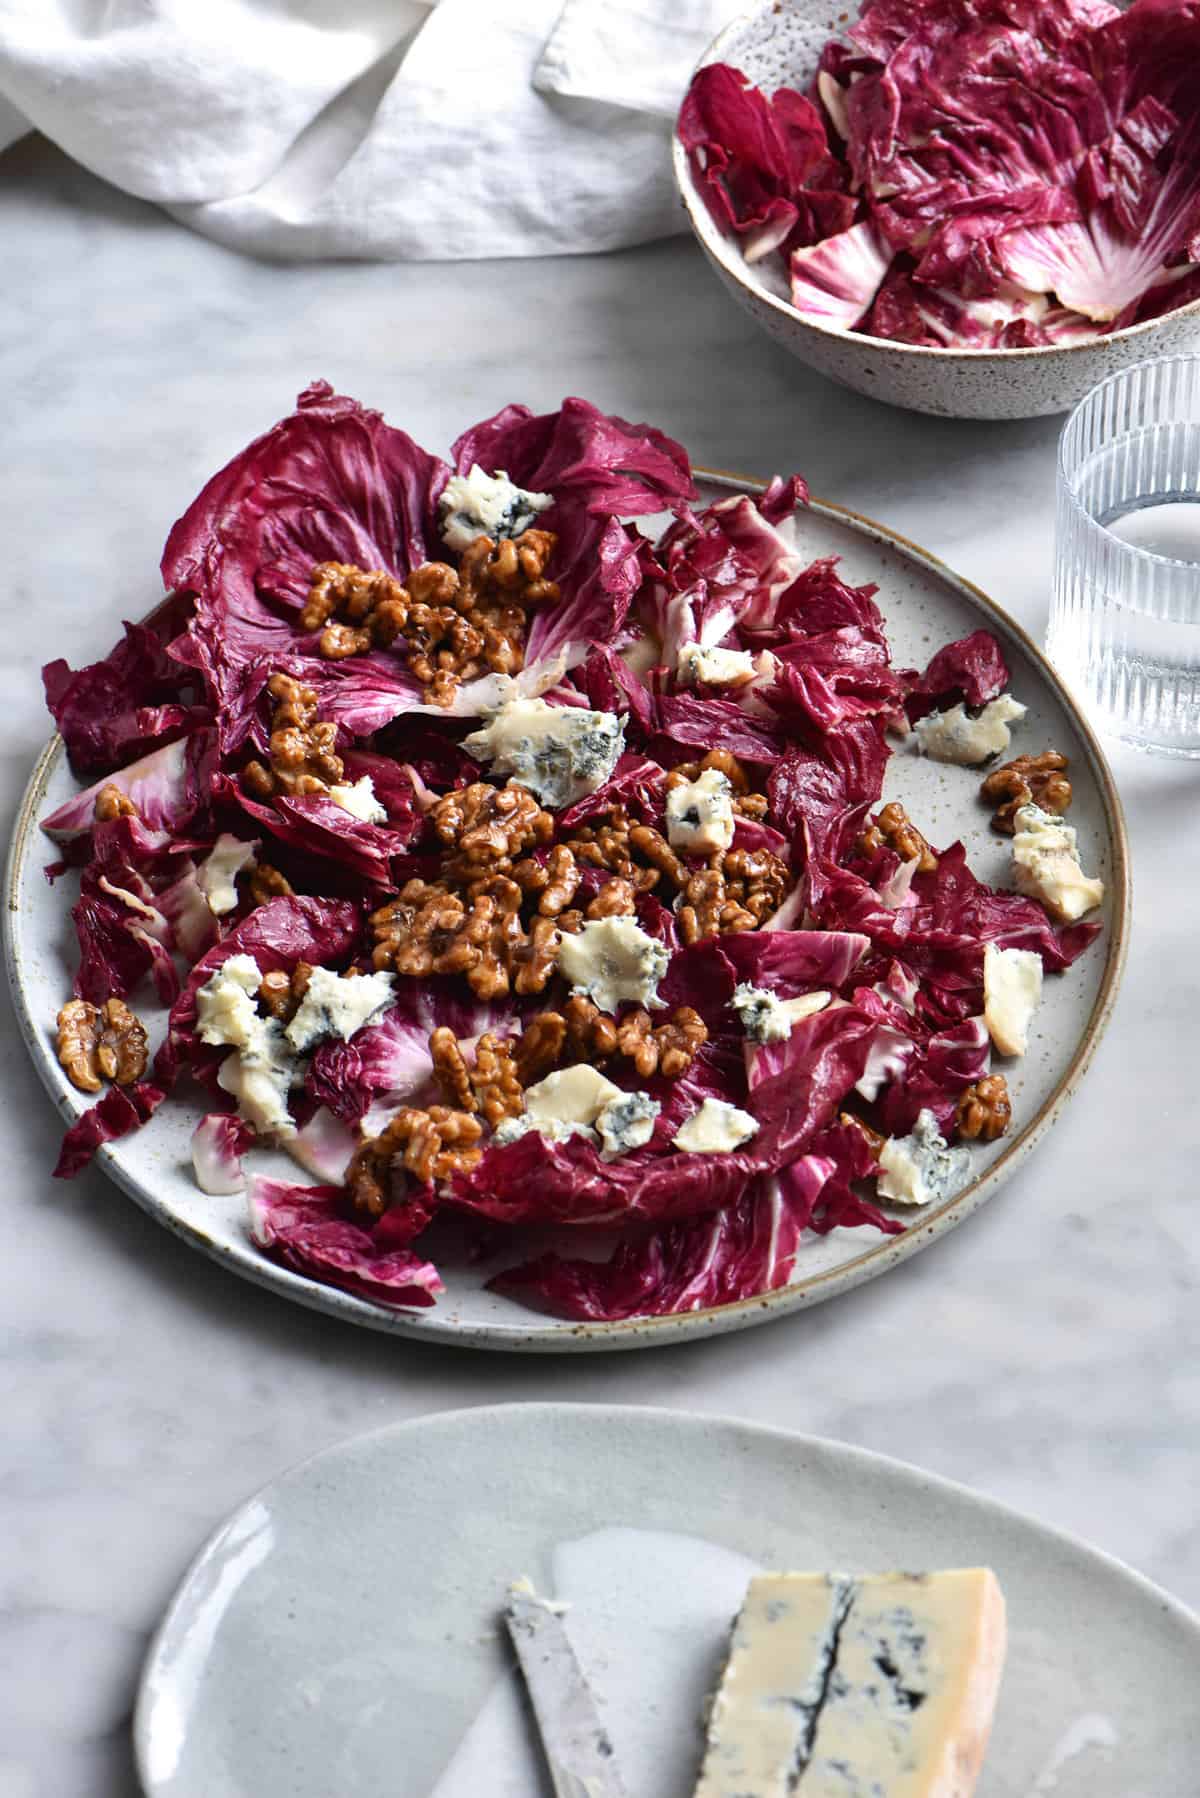 Radicchio salad with blue cheese. honey cinnamon walnuts and a sherry vinaigrette on a white marble backdrop